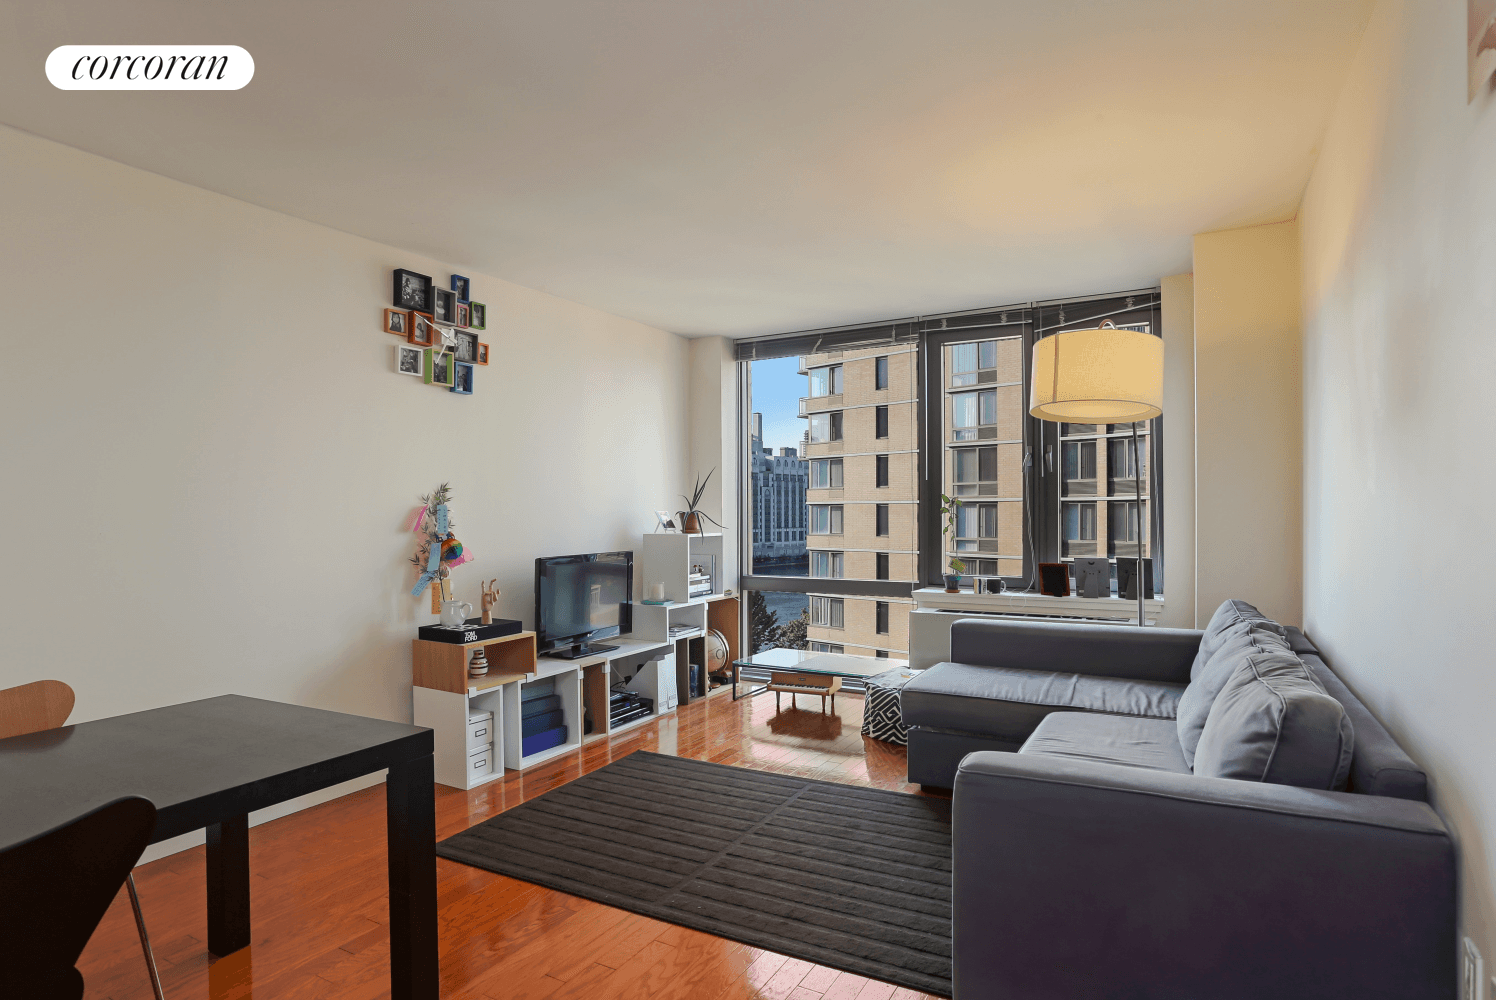 Huge 1000 sqft 2 Bedroom 2 Bathroom Apartment with a Huge Storage Bin in One of the Most Desirable Condo Buildings on Roosevelt Island !